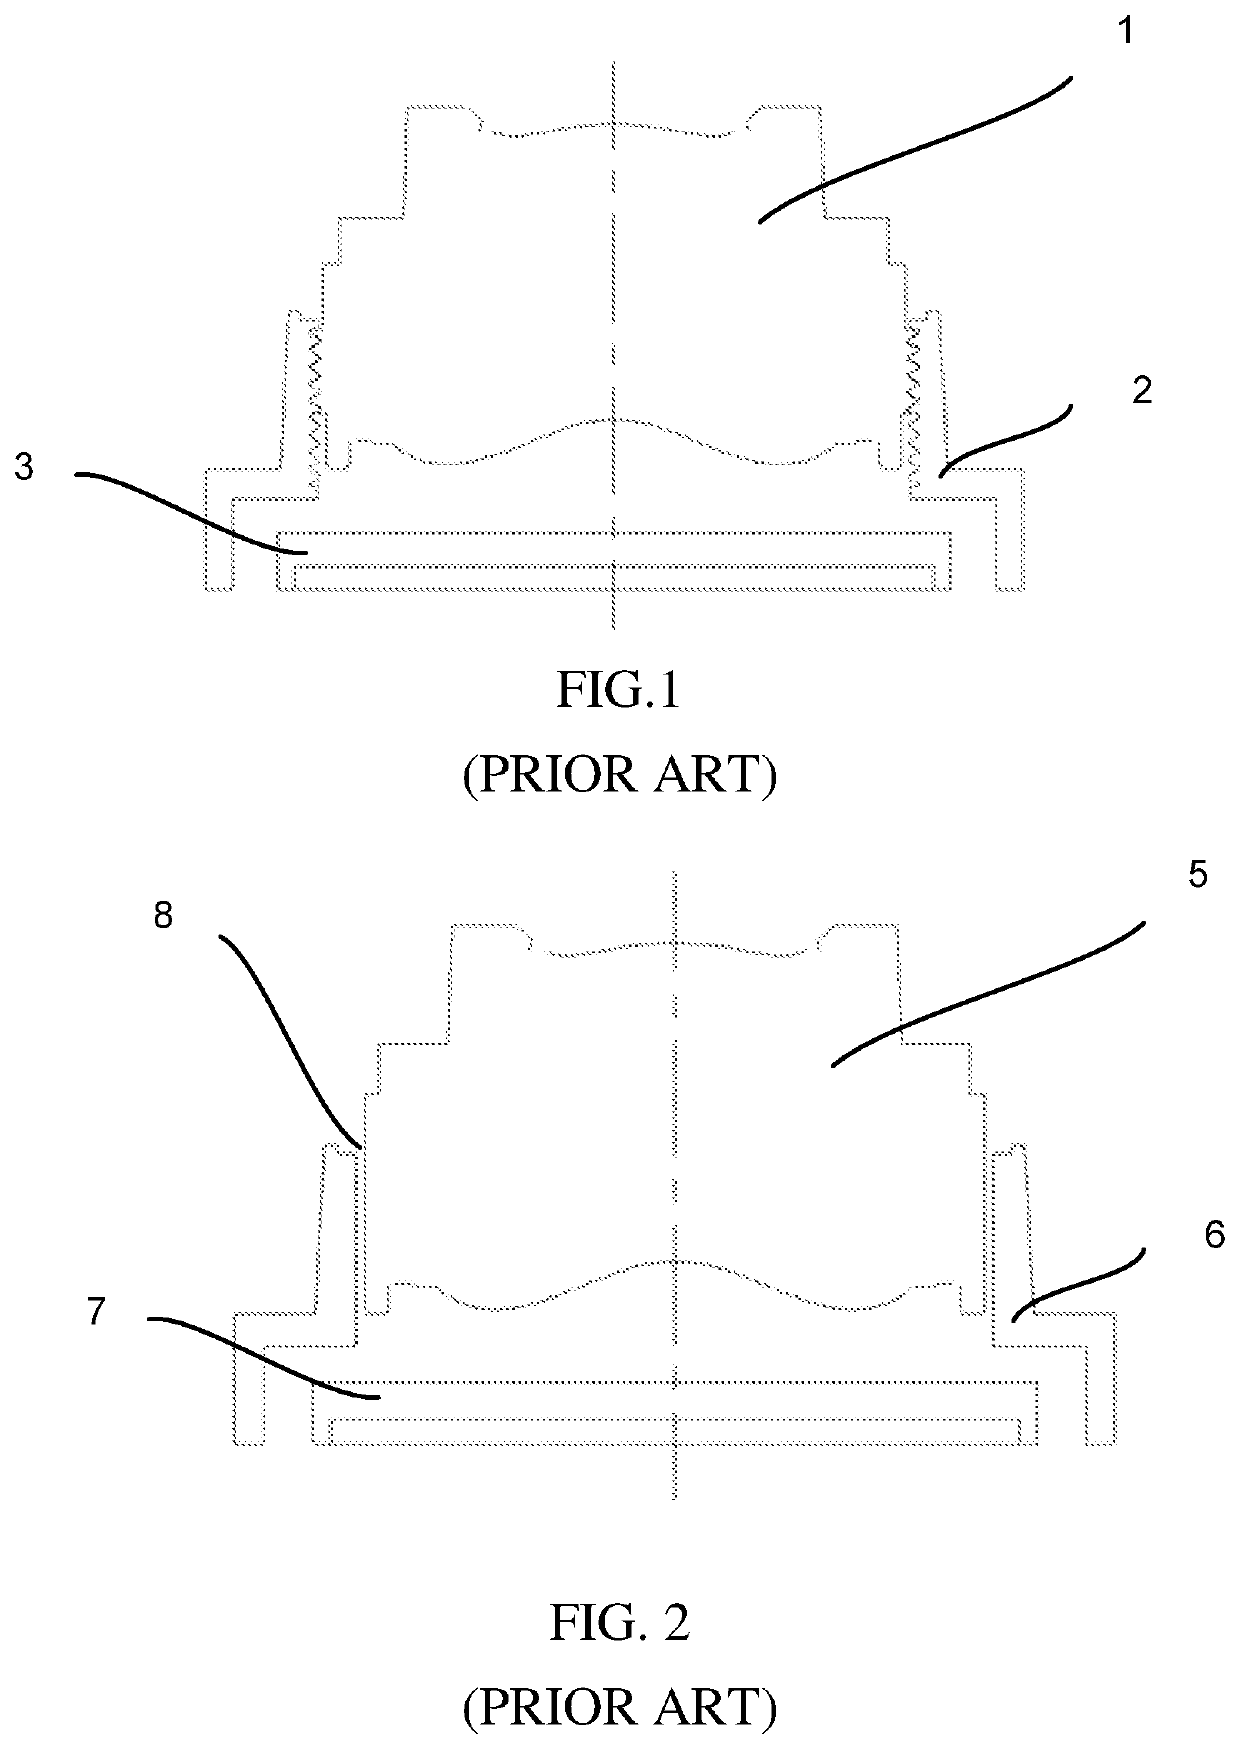 Camera module with thermal deformable material